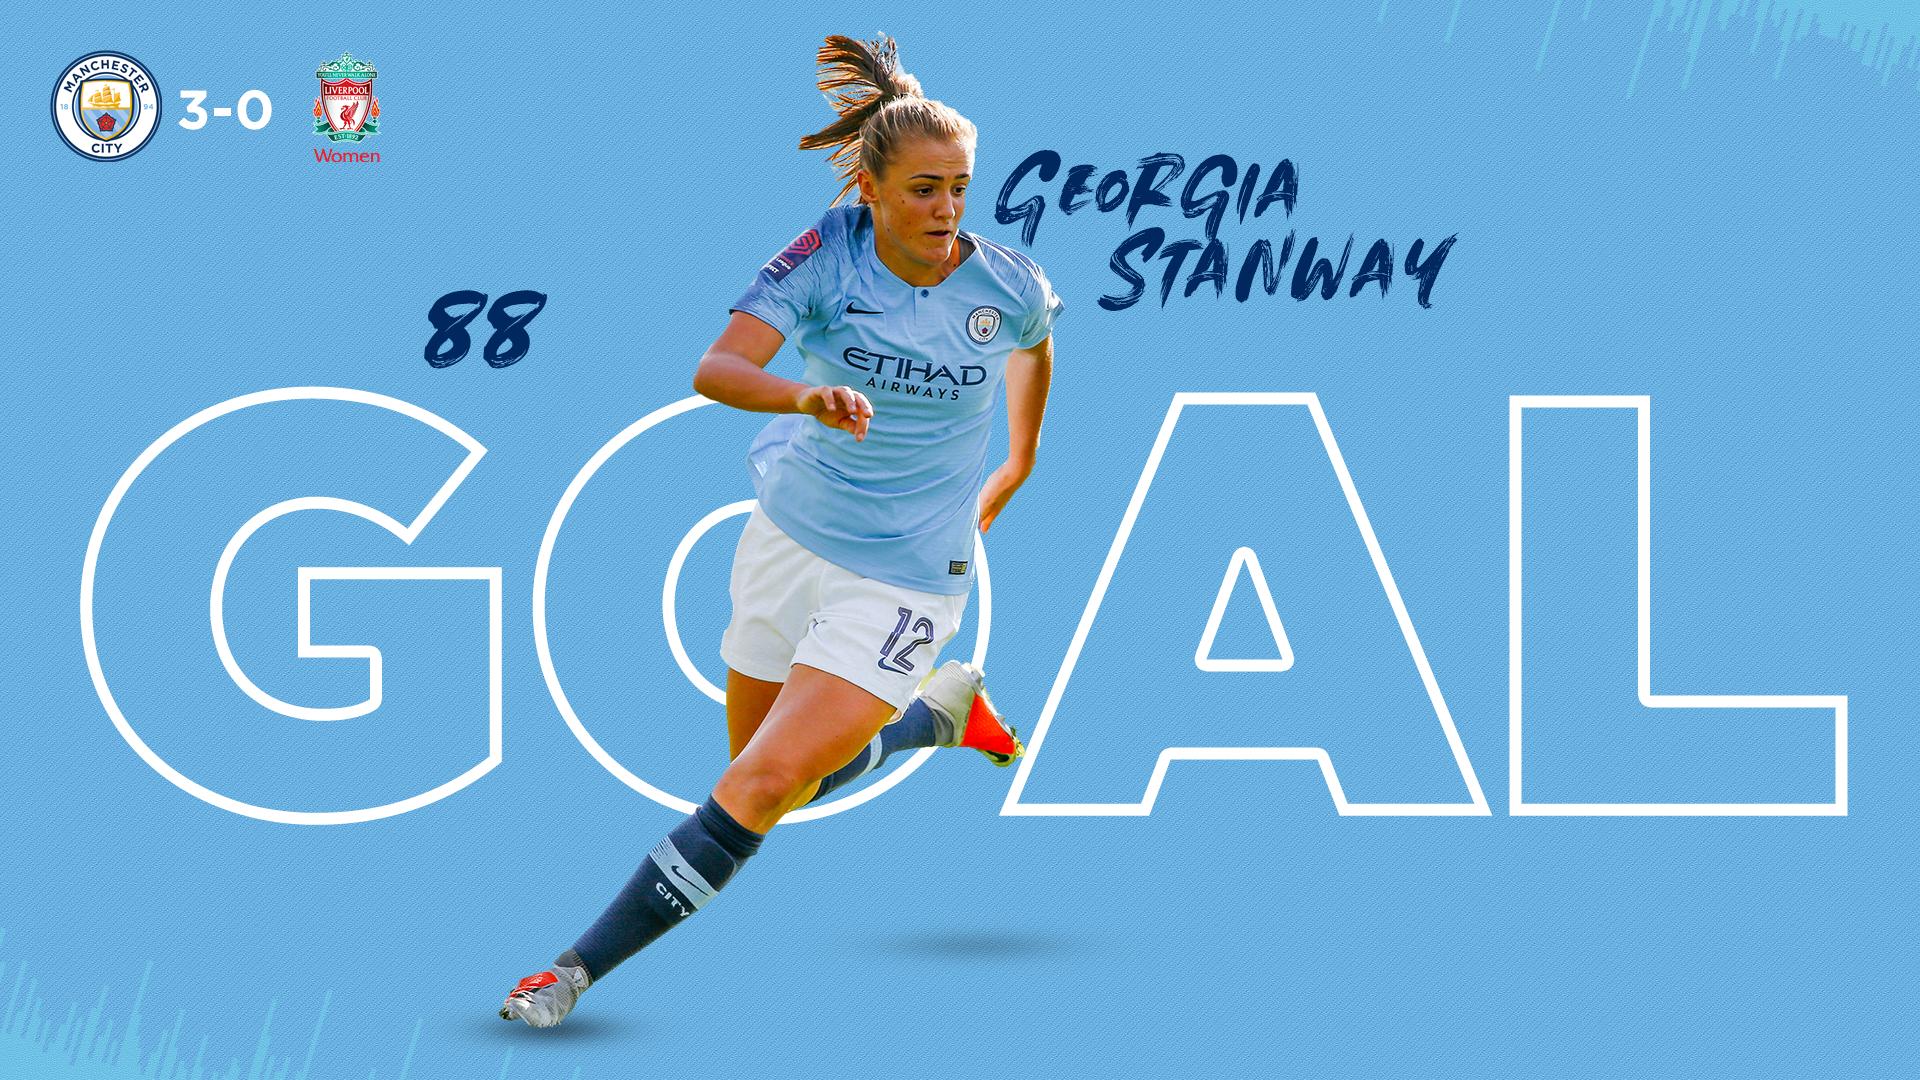 Man City Women. THAT. IS. FIRE! Stanway doubles